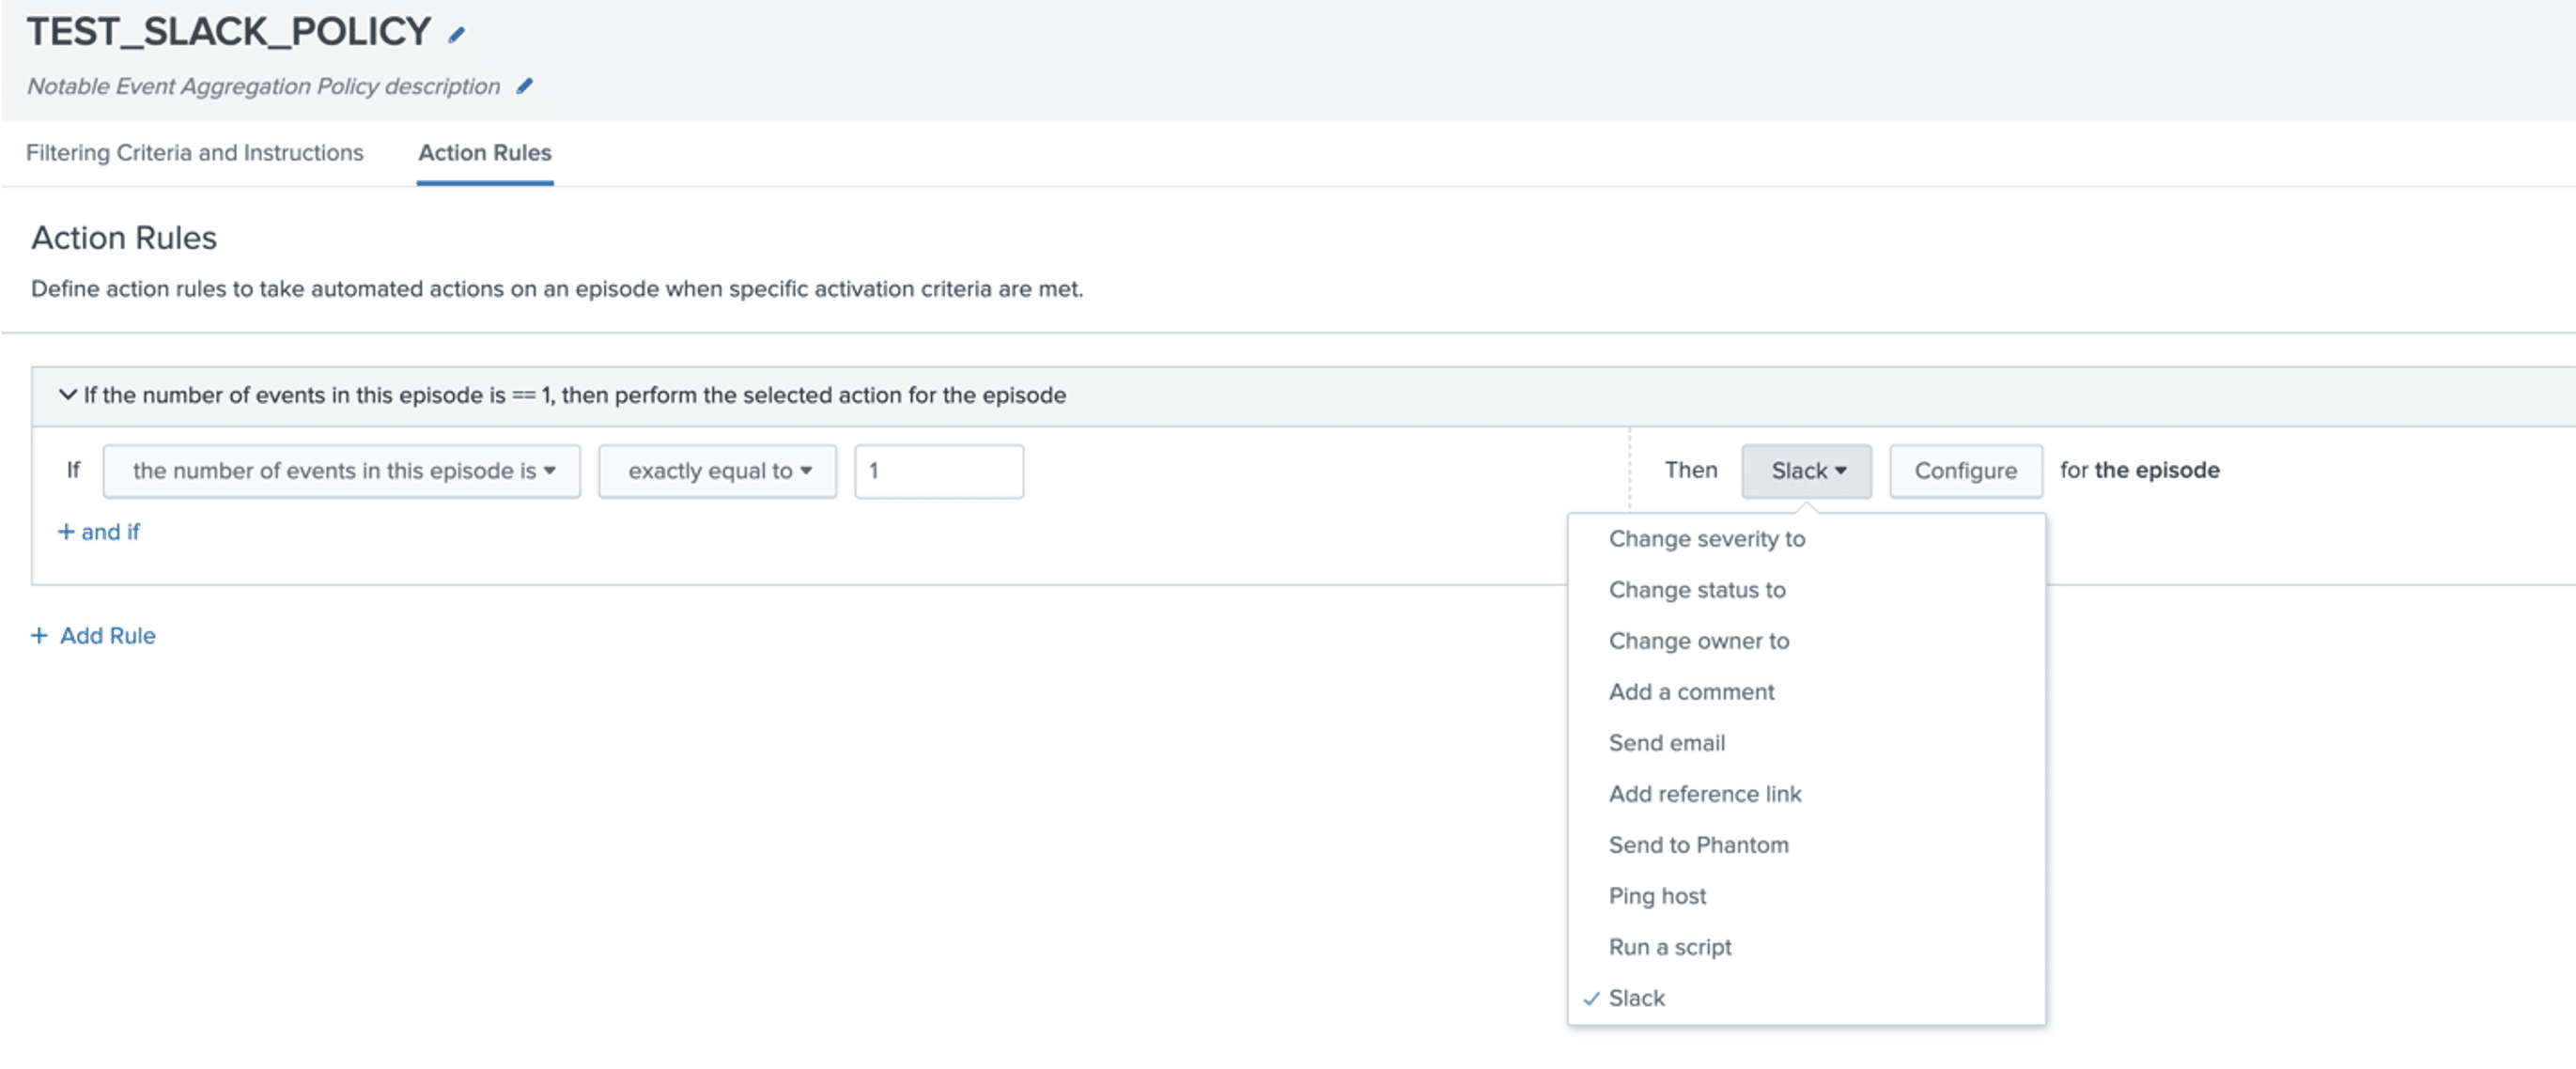 Slack_Test_Policy visiting the Action Rules tab now shows the Slack action as an option.ITSI Aggregation Policy